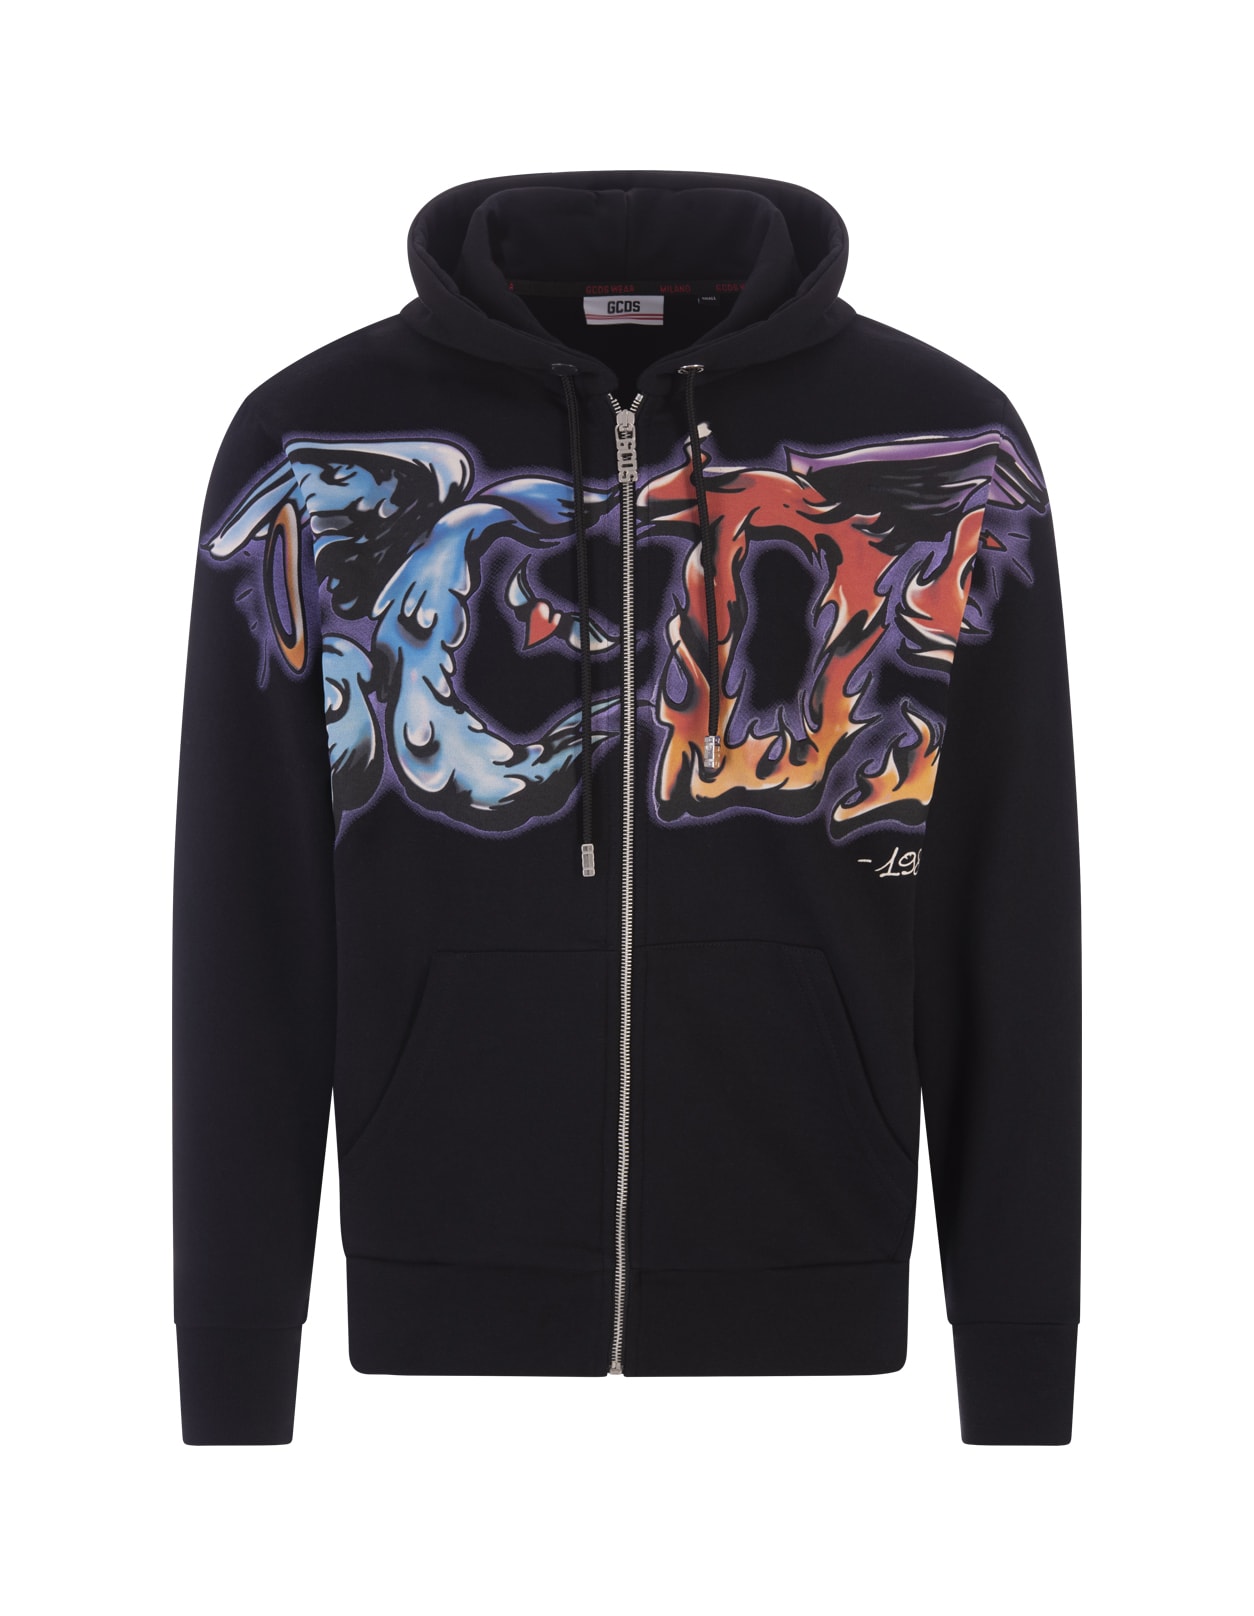 Man Black Zipped Hoodie With Multicolored Gcds Maxi Graphic Print